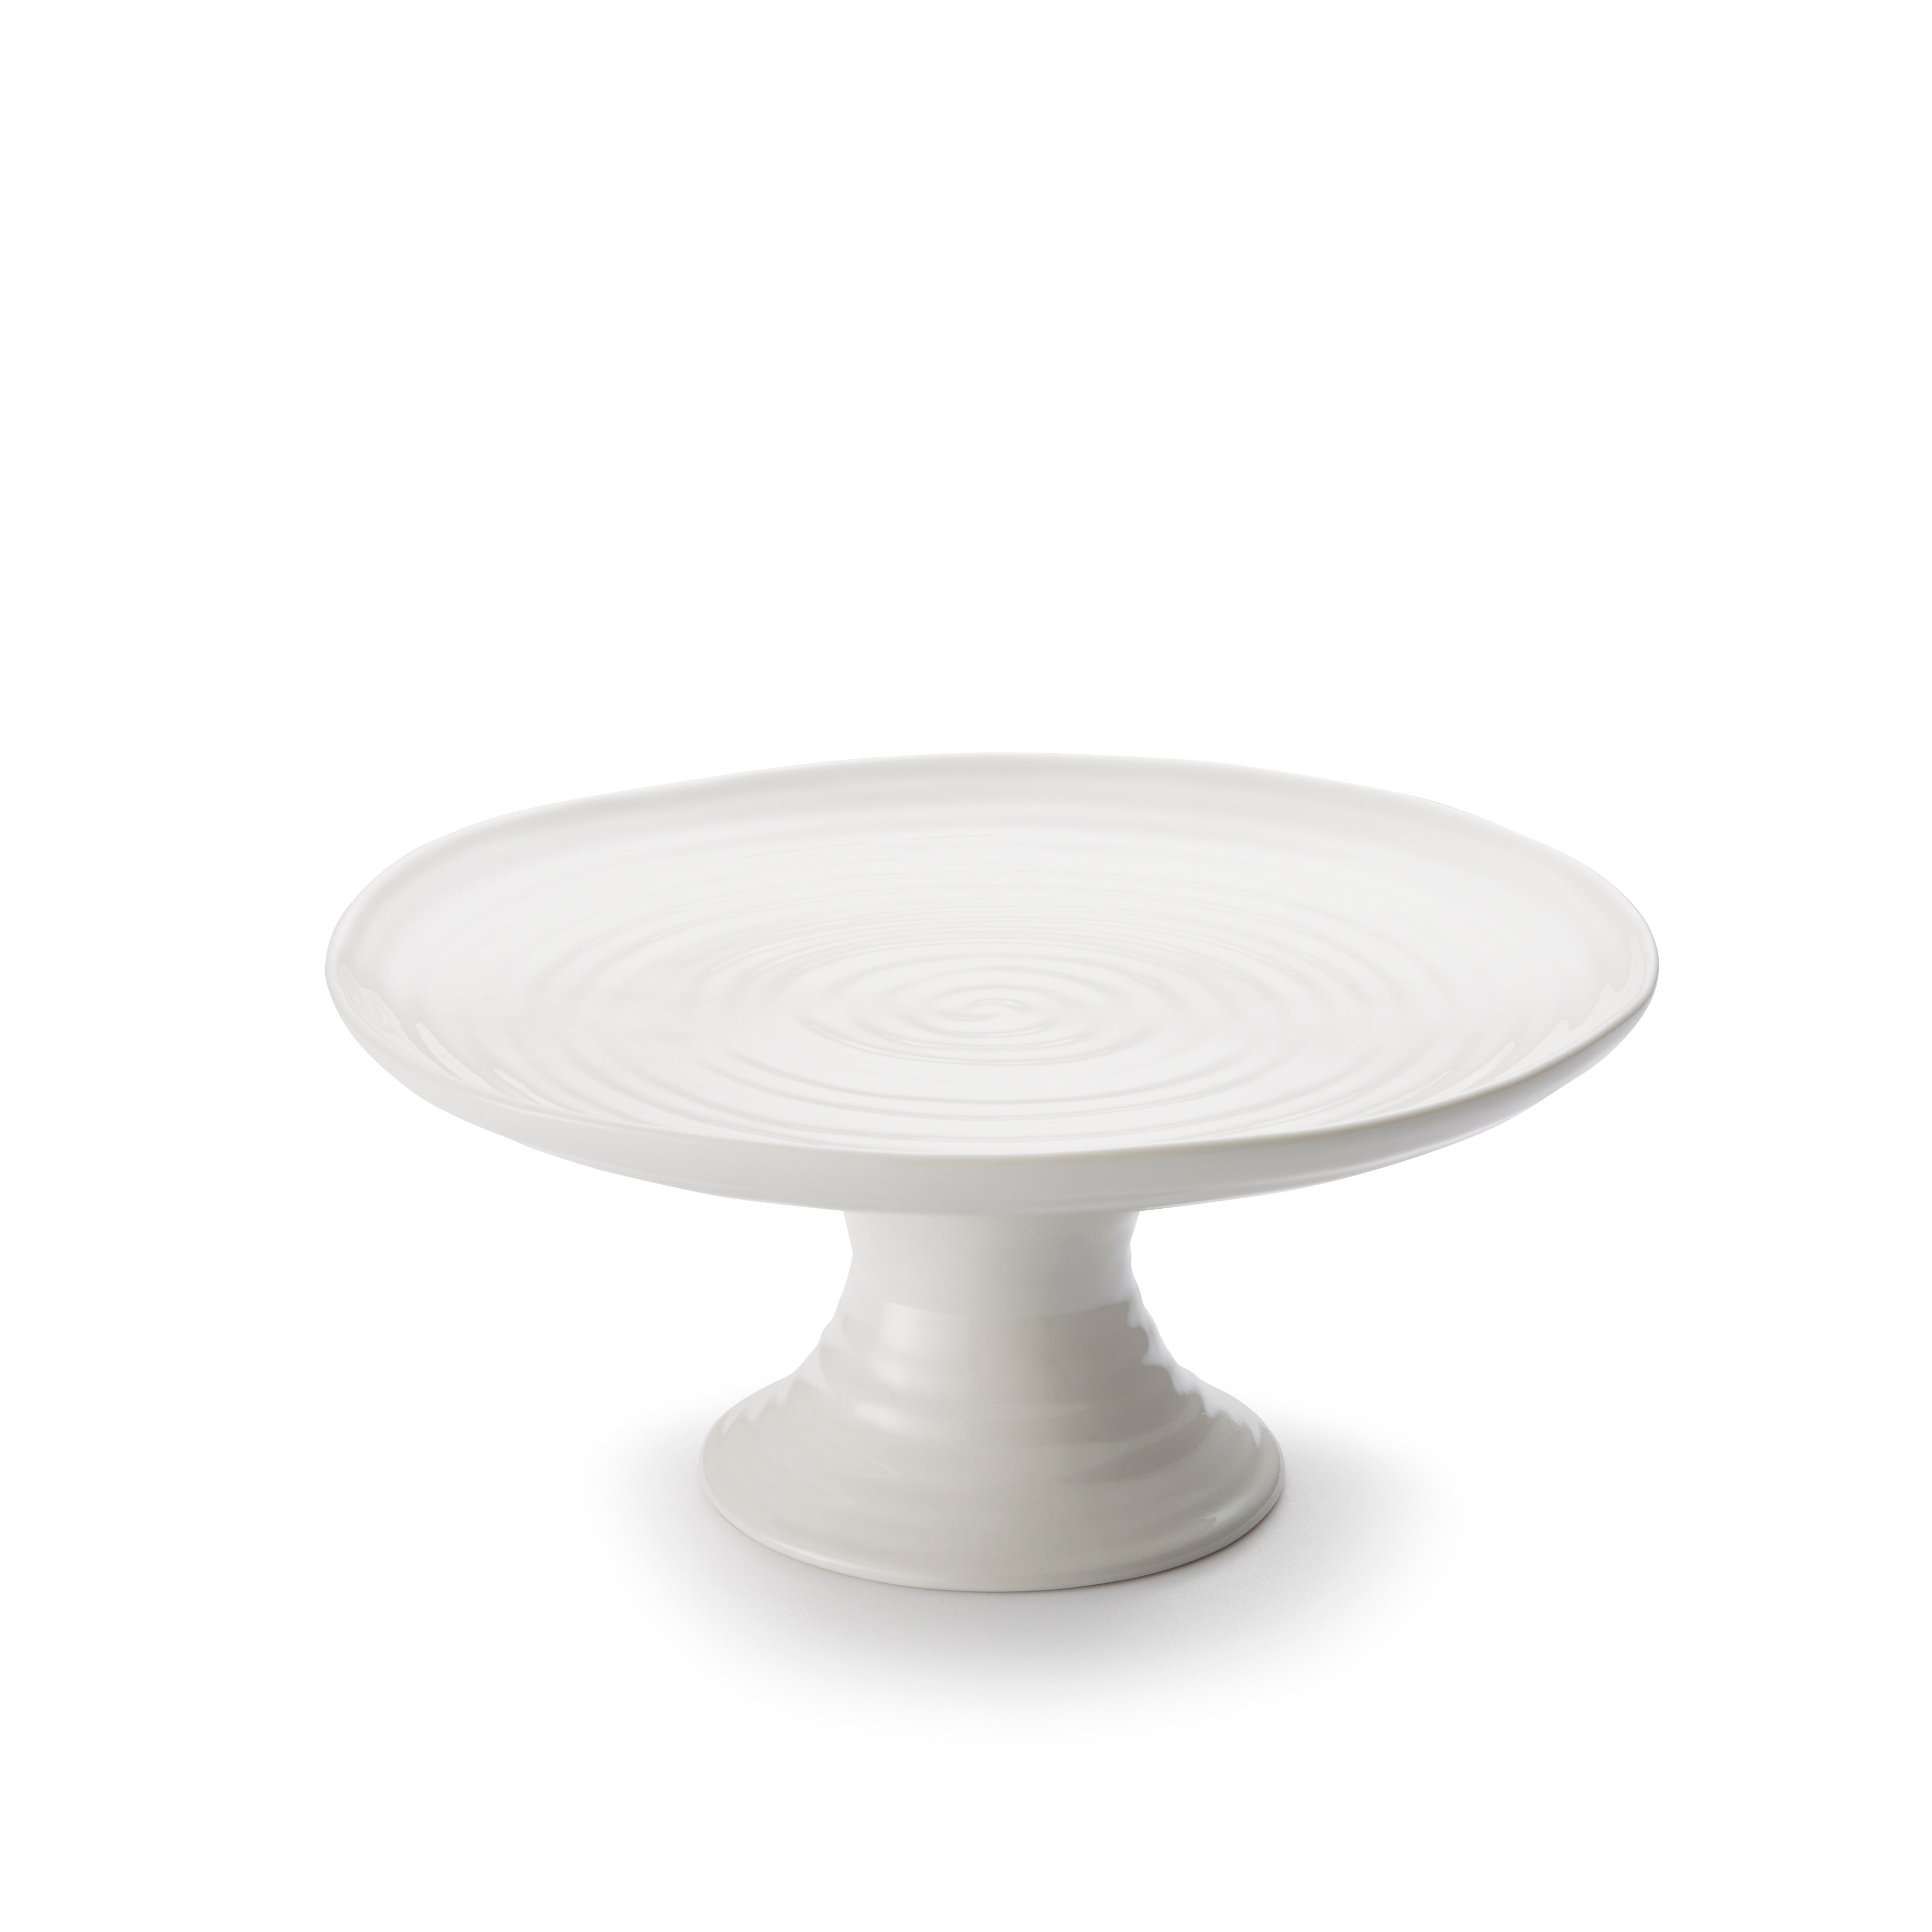 Sophie Conran For Portmeirion Small Footed Cake Plate White